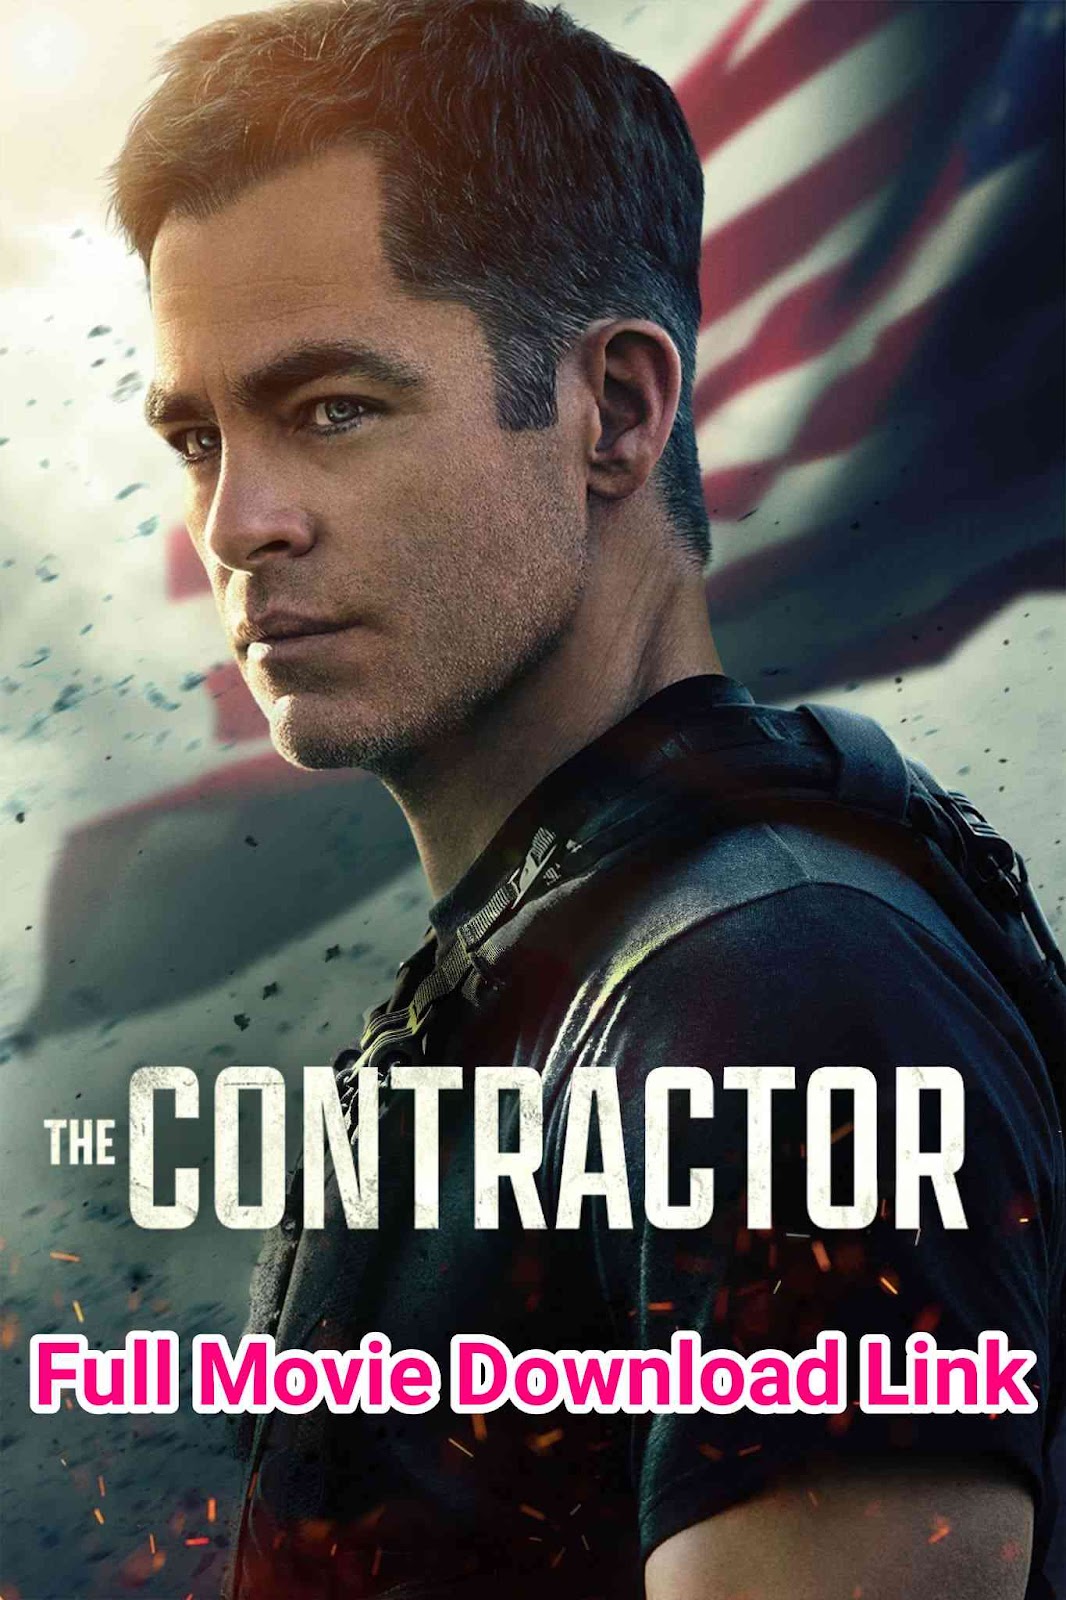 the-contractor-movie-Download-Link